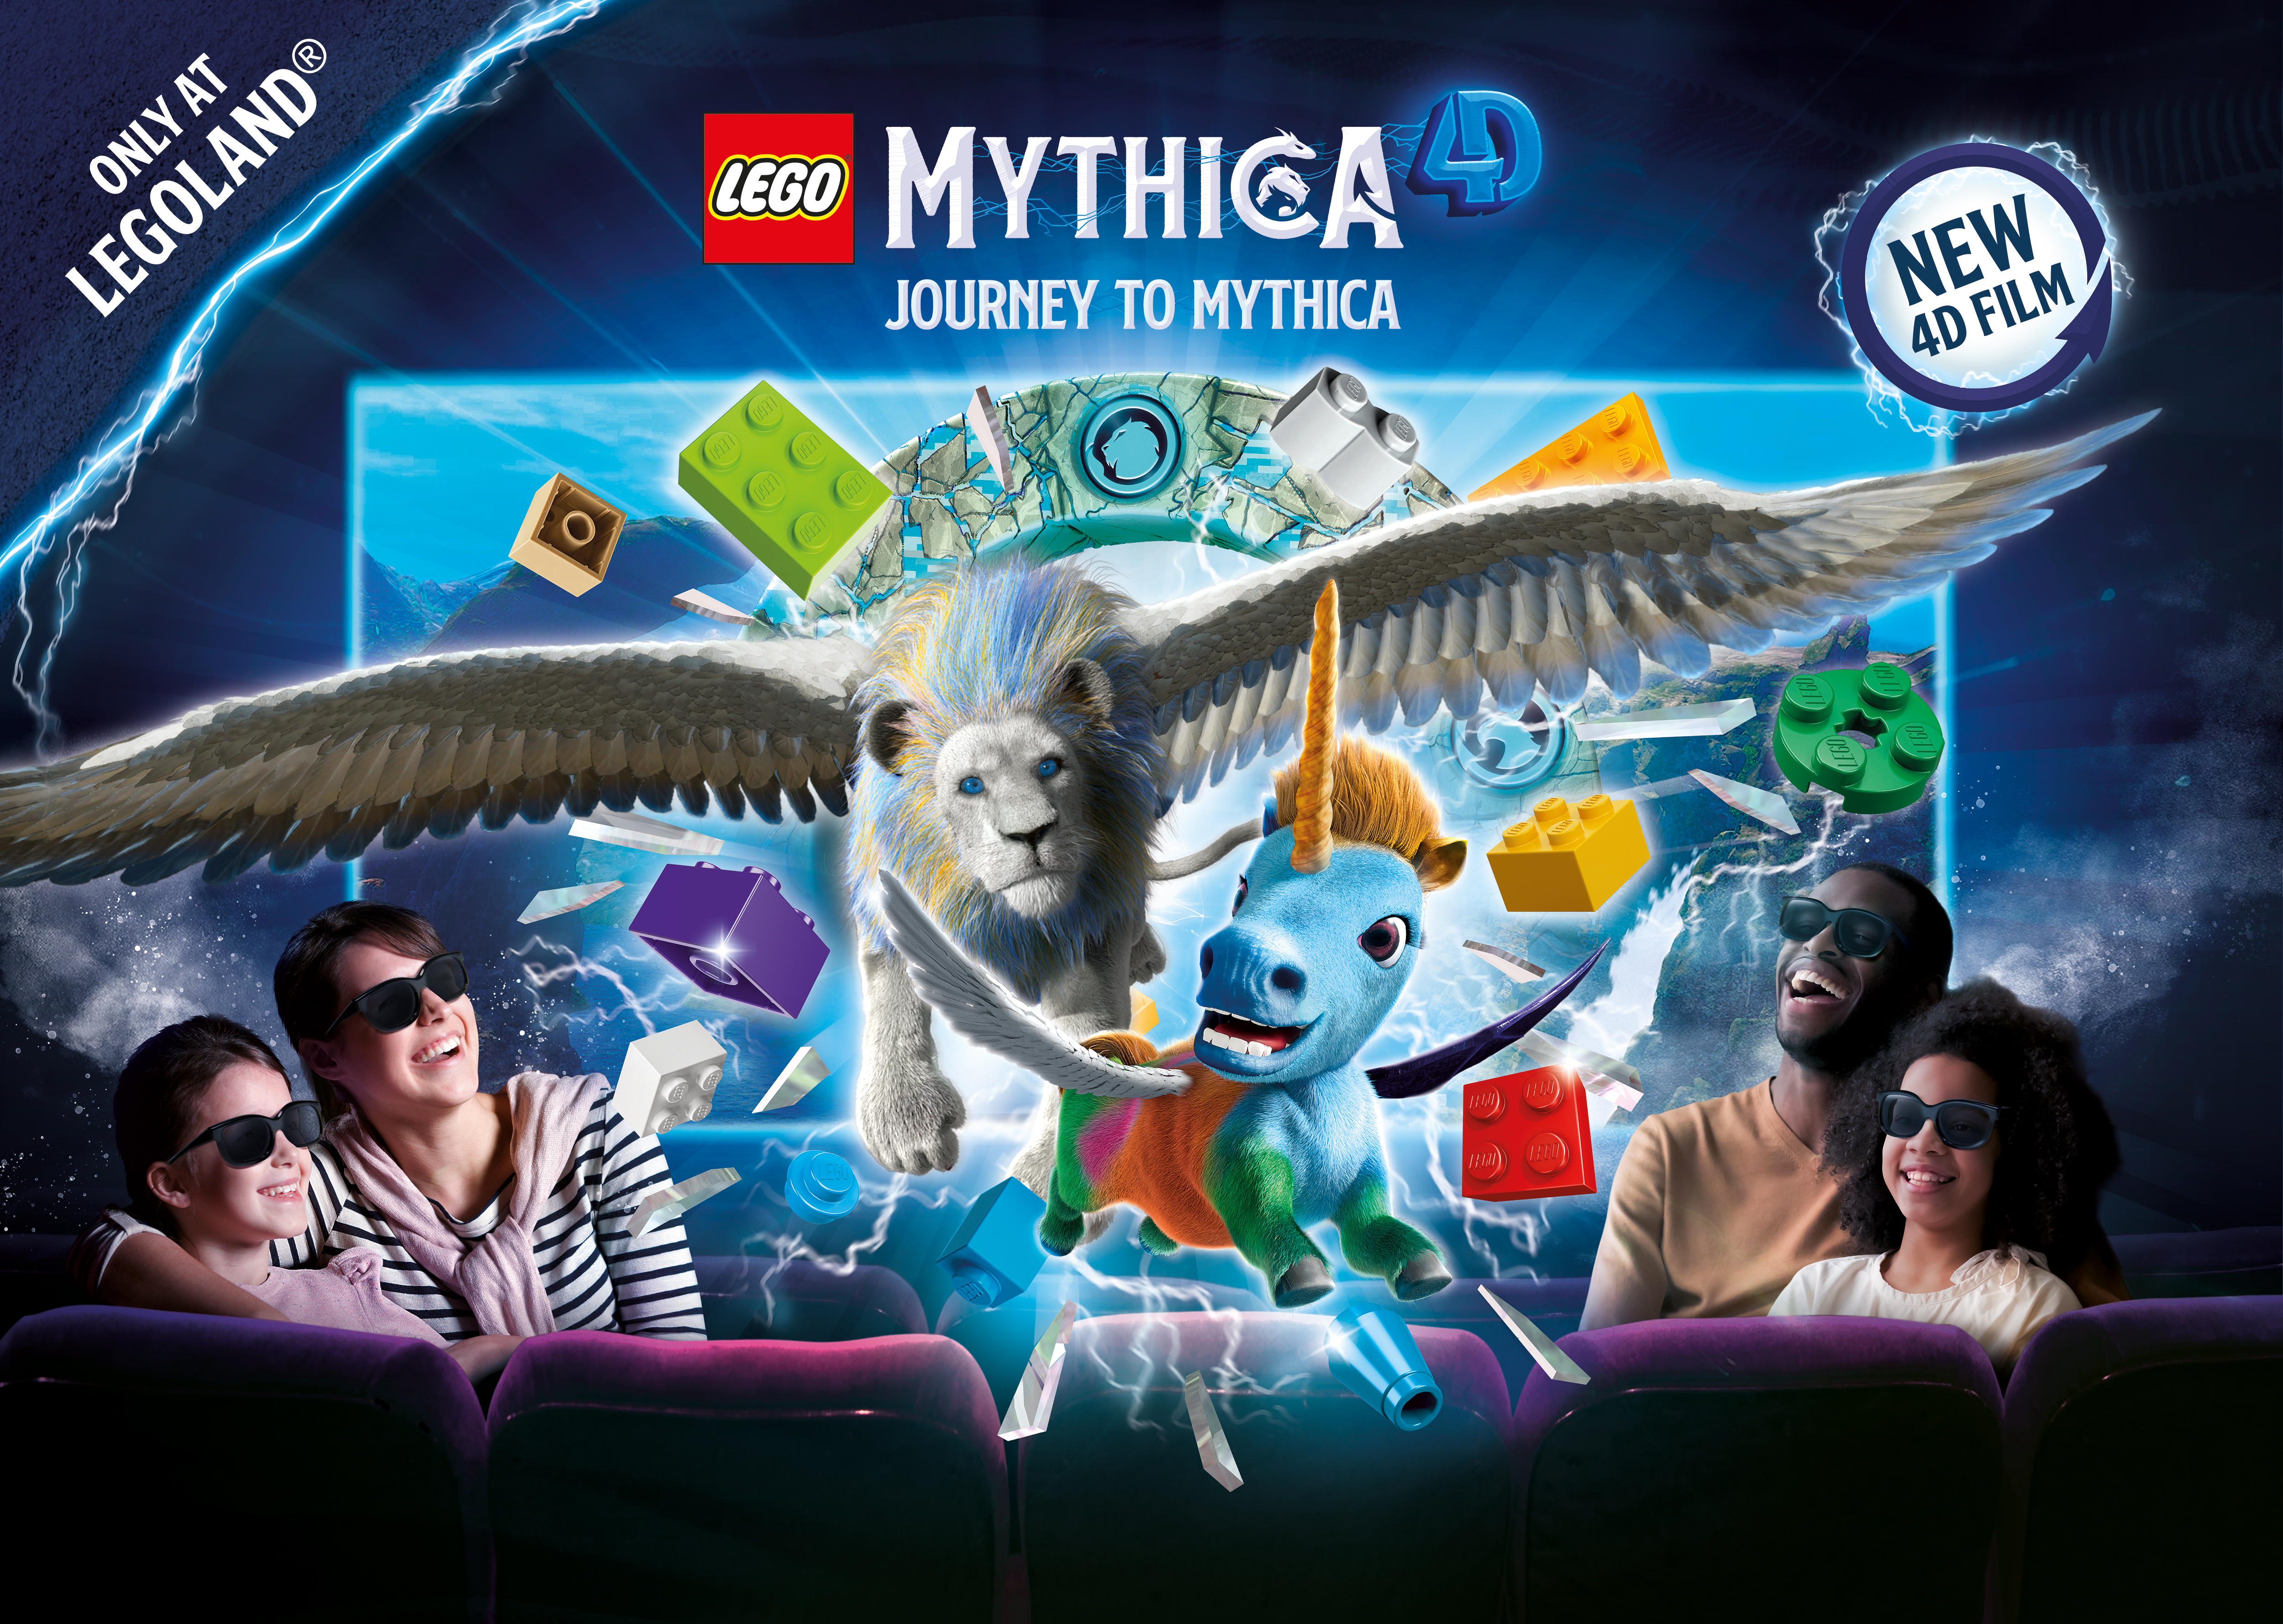 LEGO MYTHICA - Journey to MYTHICA 4D movie at LEGO Studios 4D